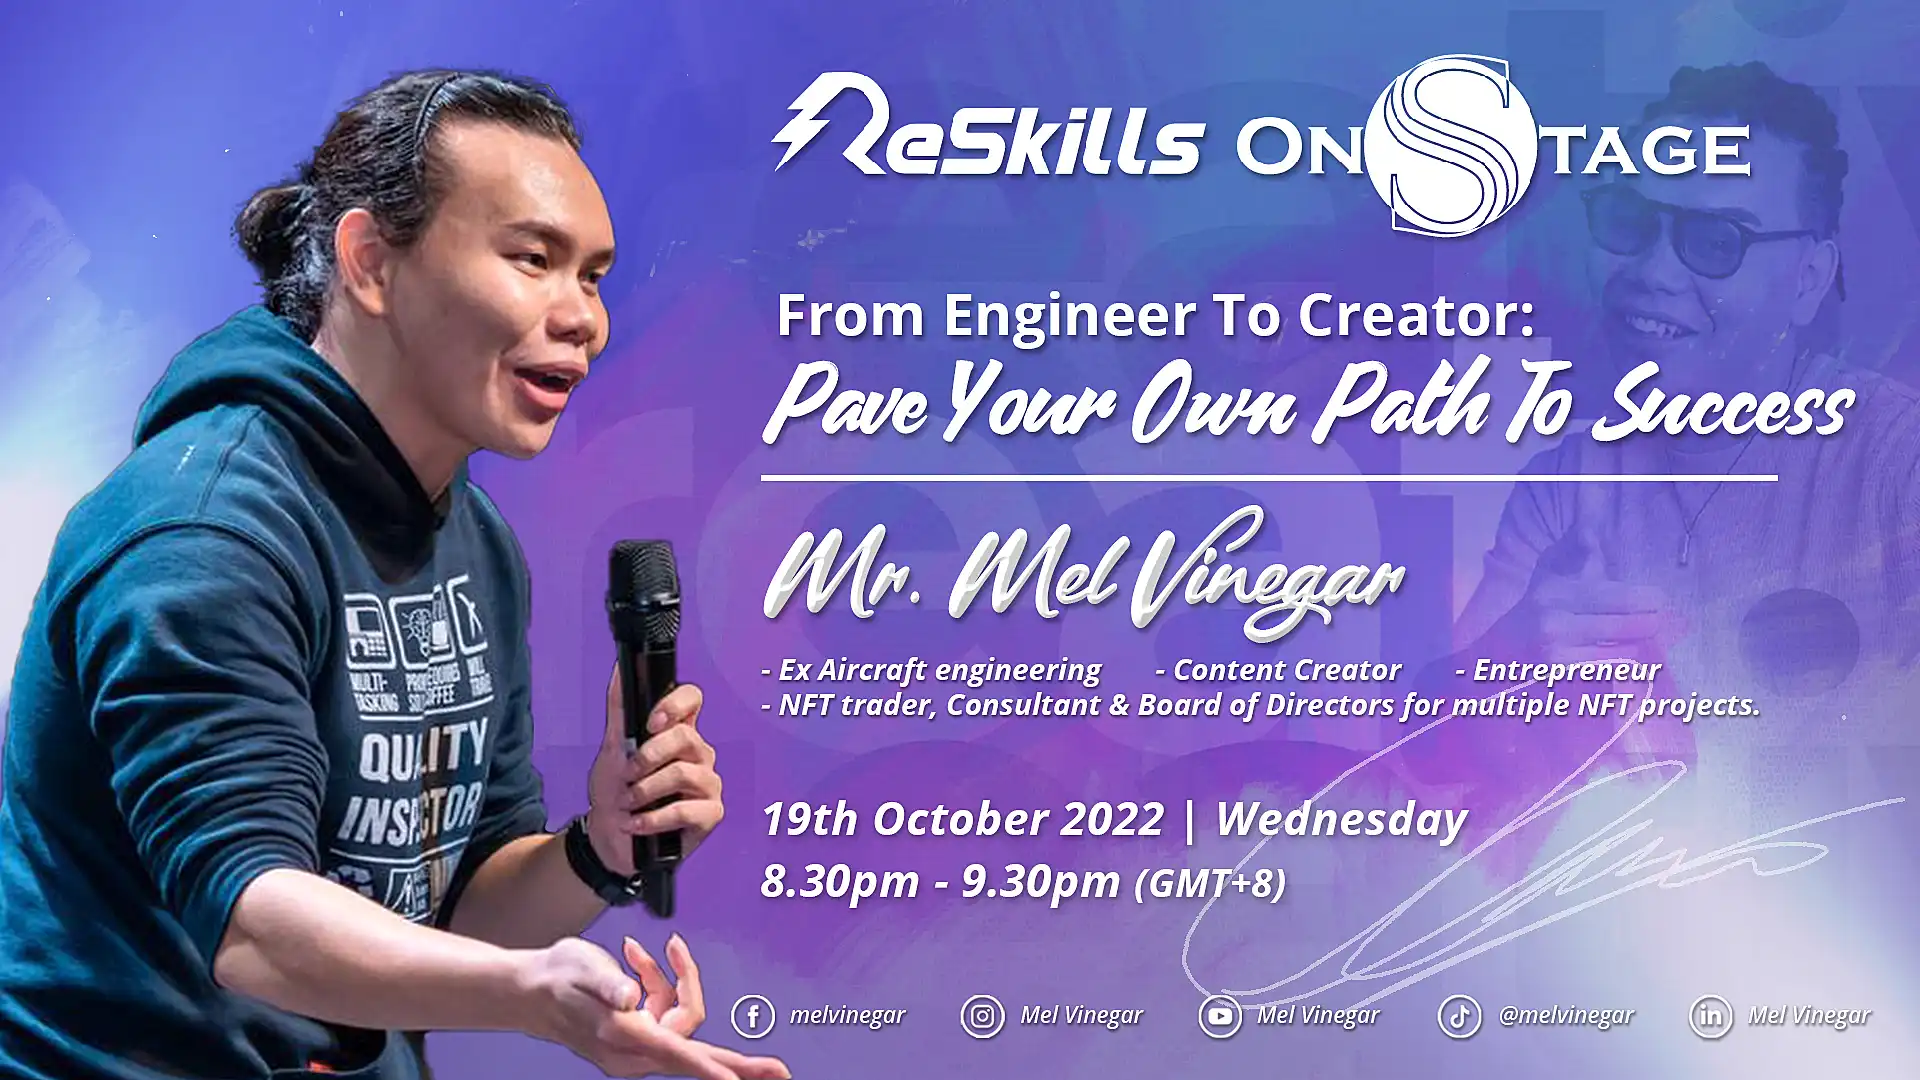 From Engineer to Creator: Pave Your Own Path to Success